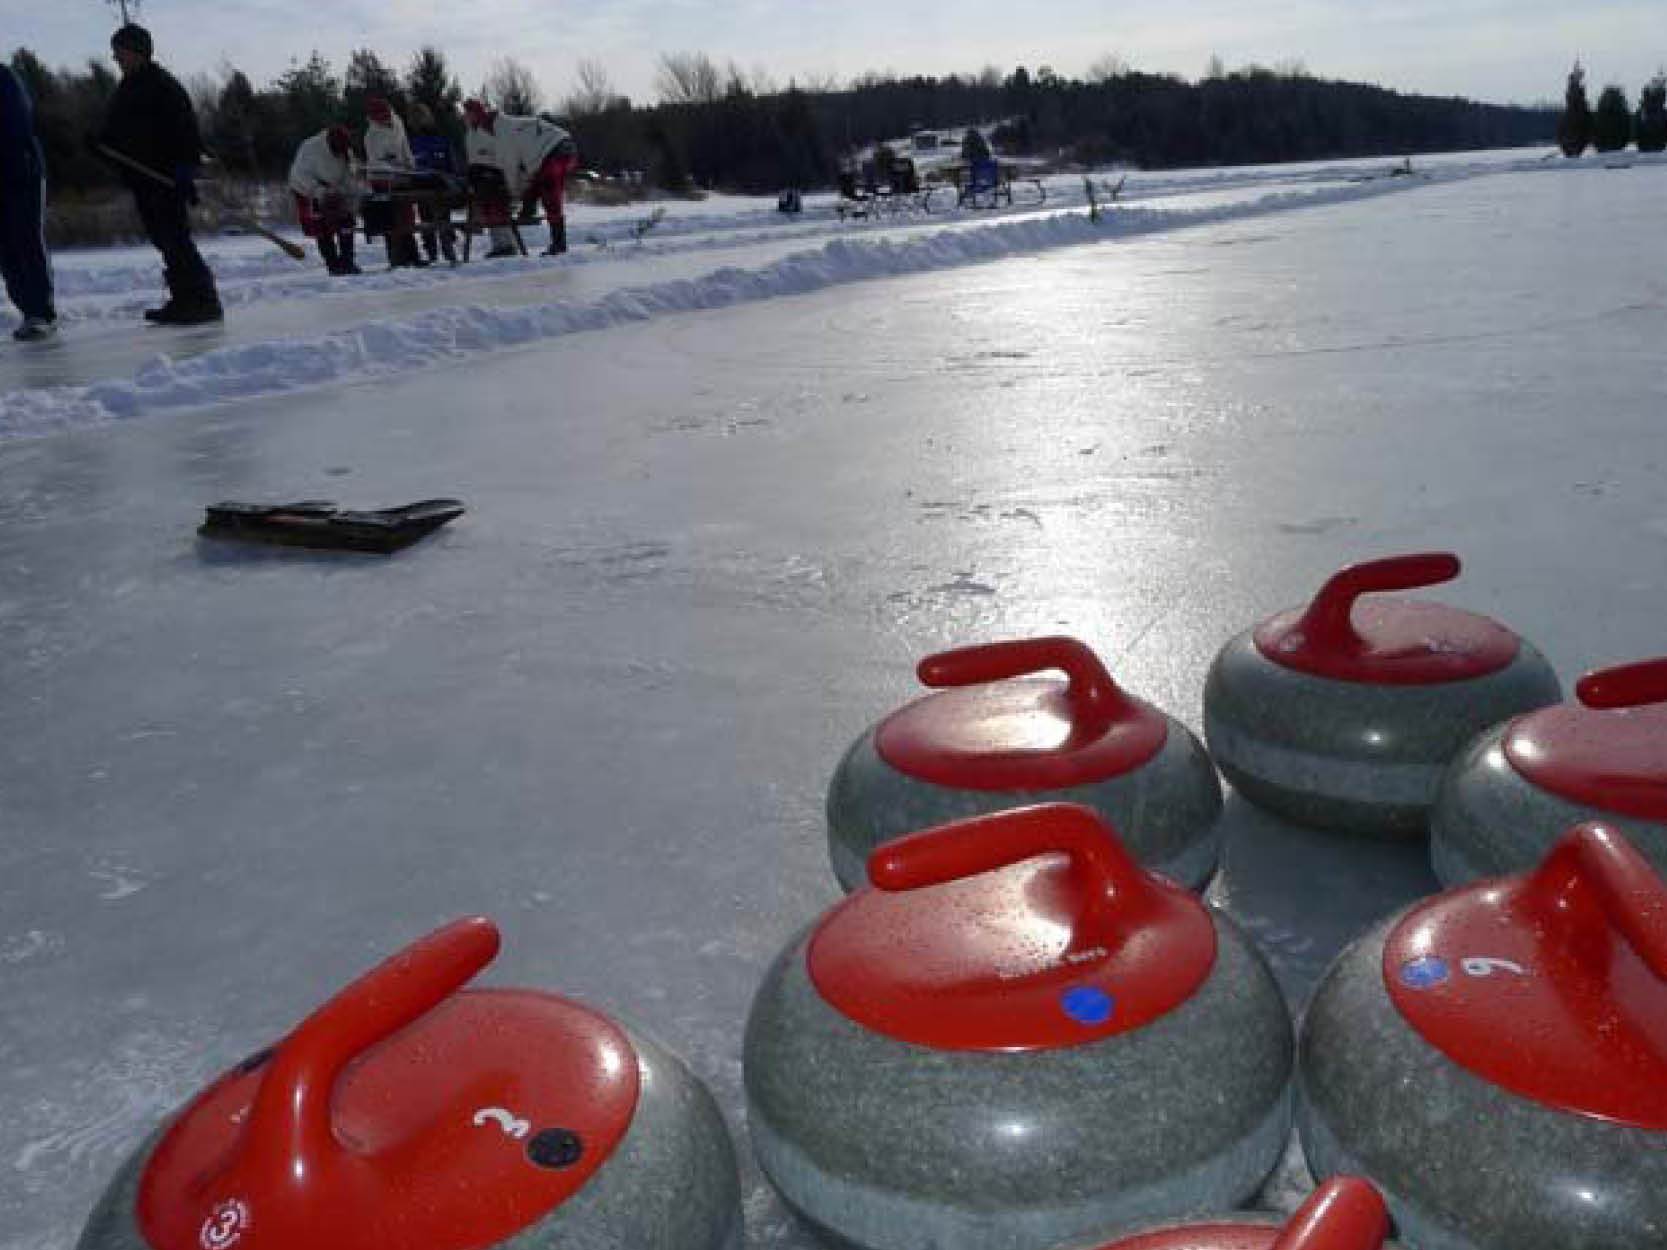 Curling stones on pond ice